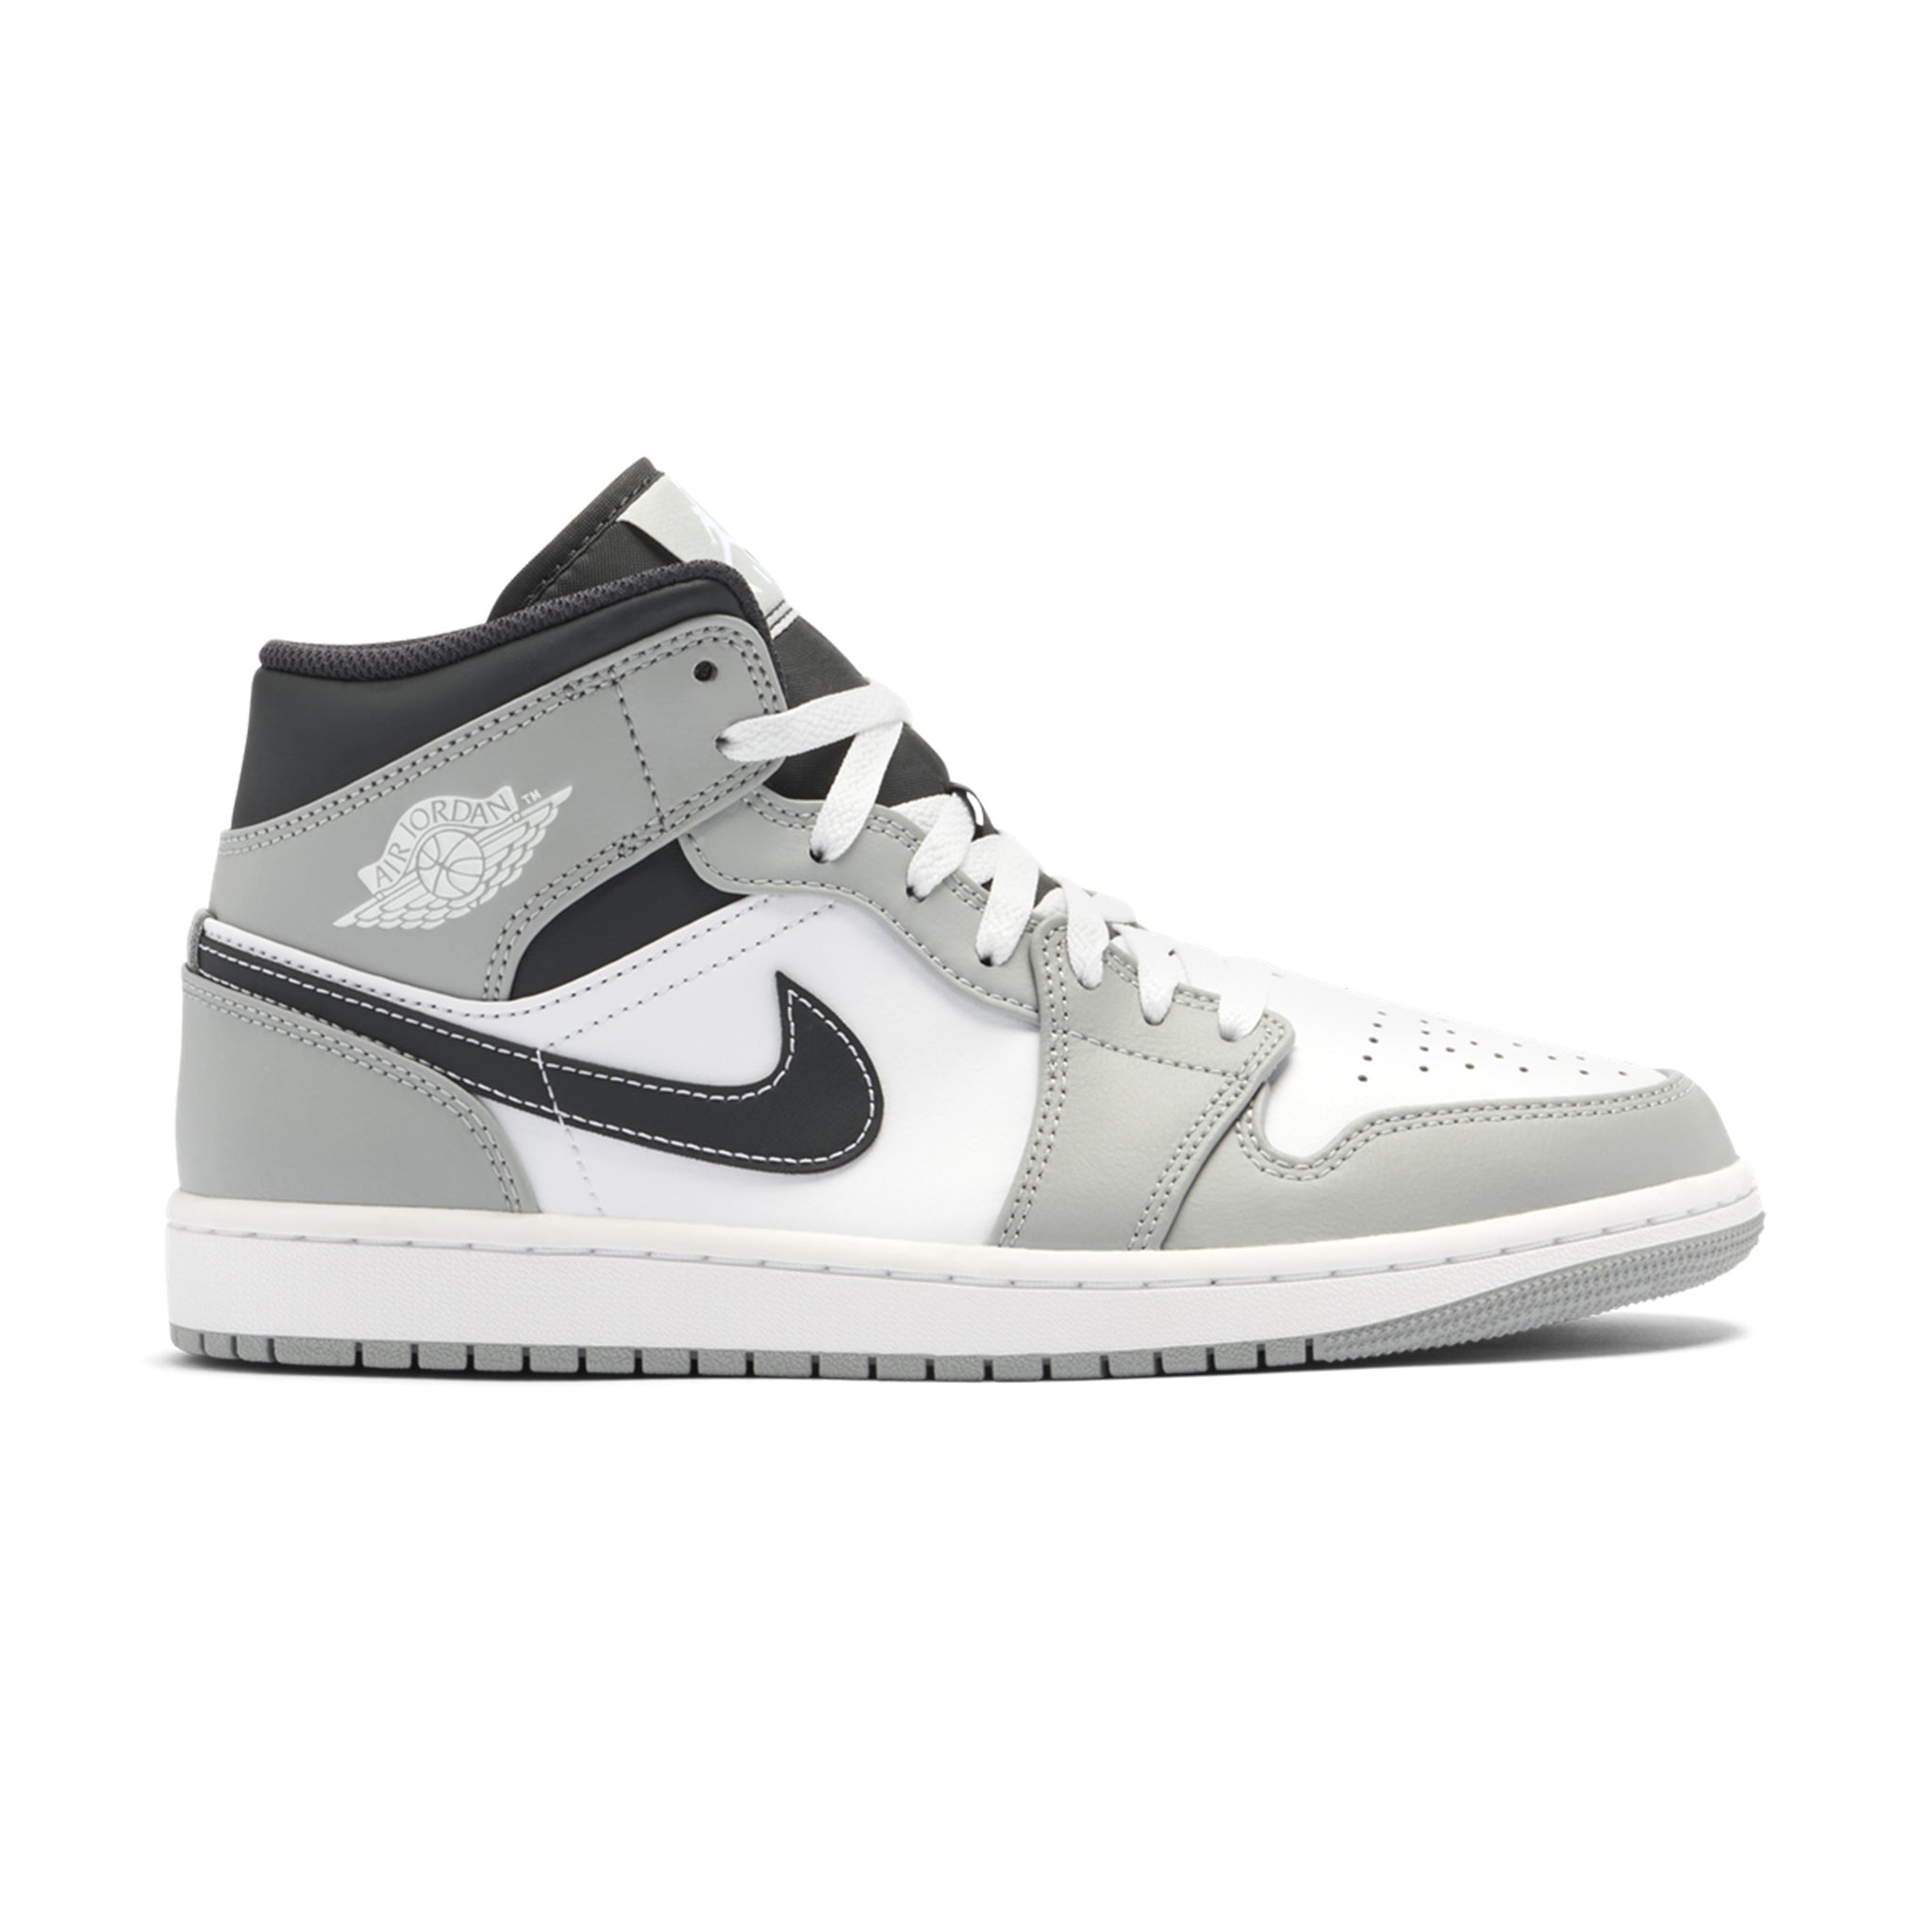 Front view of Air Wmns Air into jordan 1 Mid 'Wolf Grey Aluminum' BQ6472 105 Light Smoke Grey Anthracite (GS) 554725-078